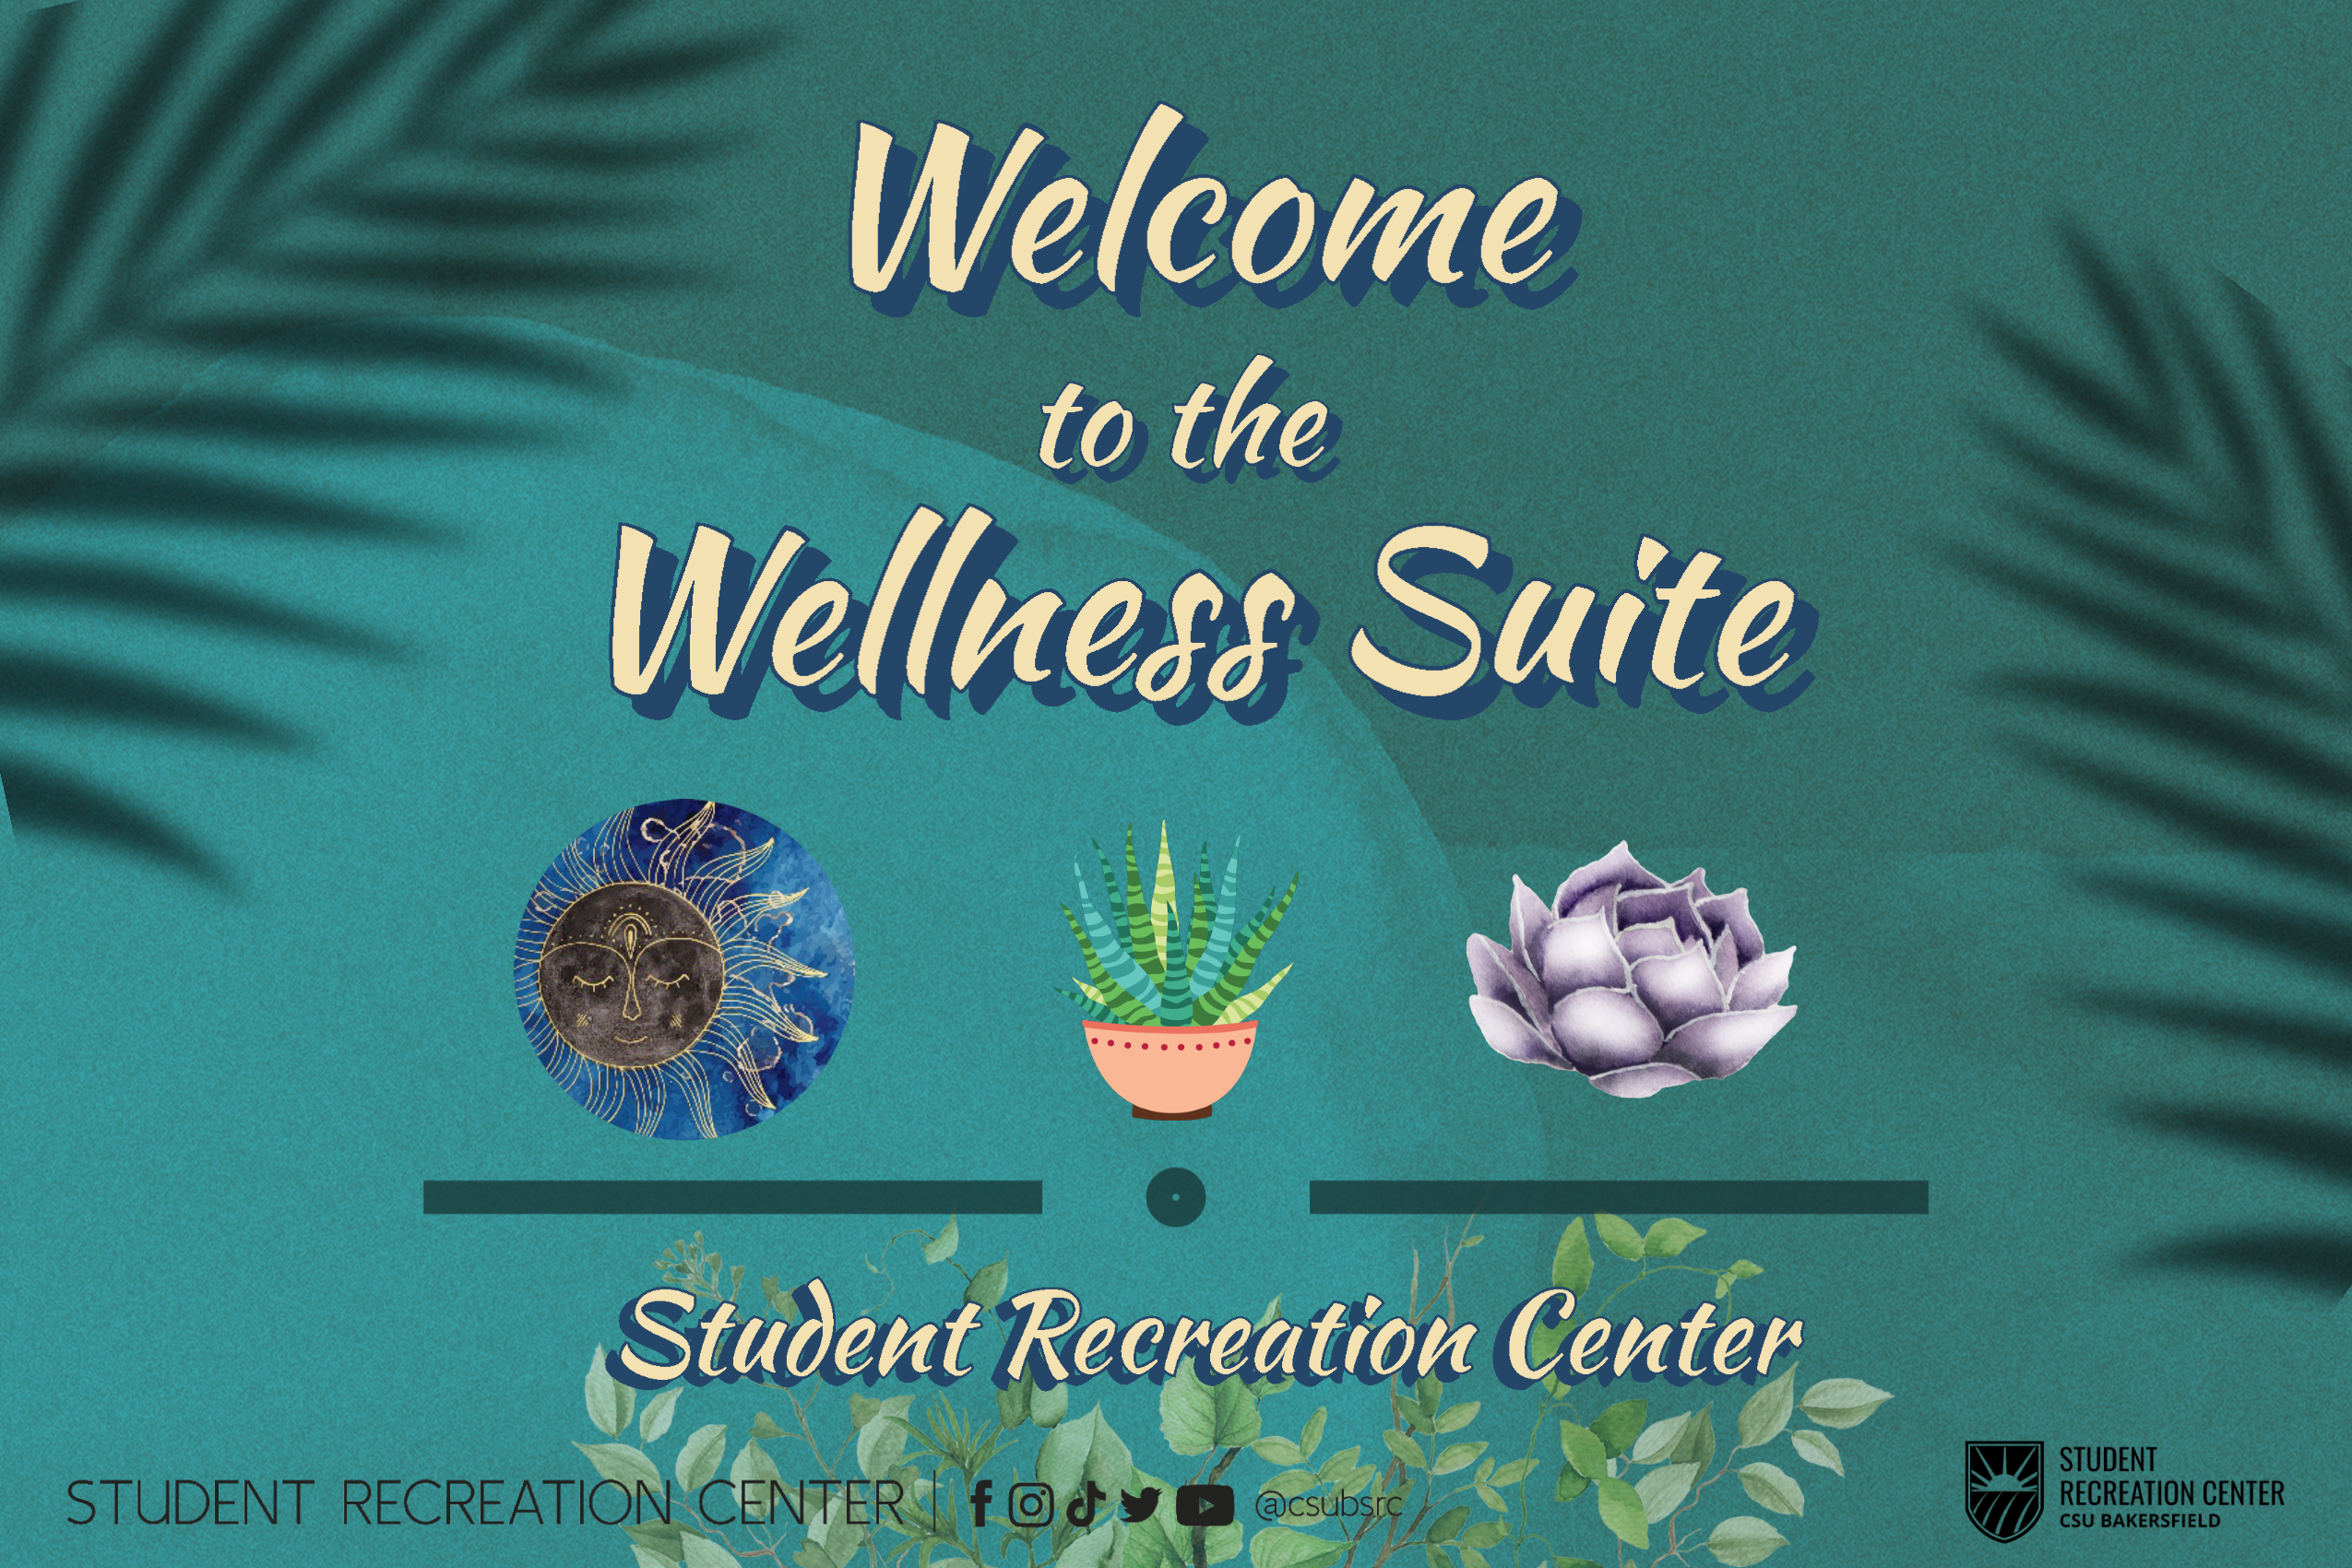 Welcome-to-the-Wellness-Suite-V4-Landscape-1.jpg